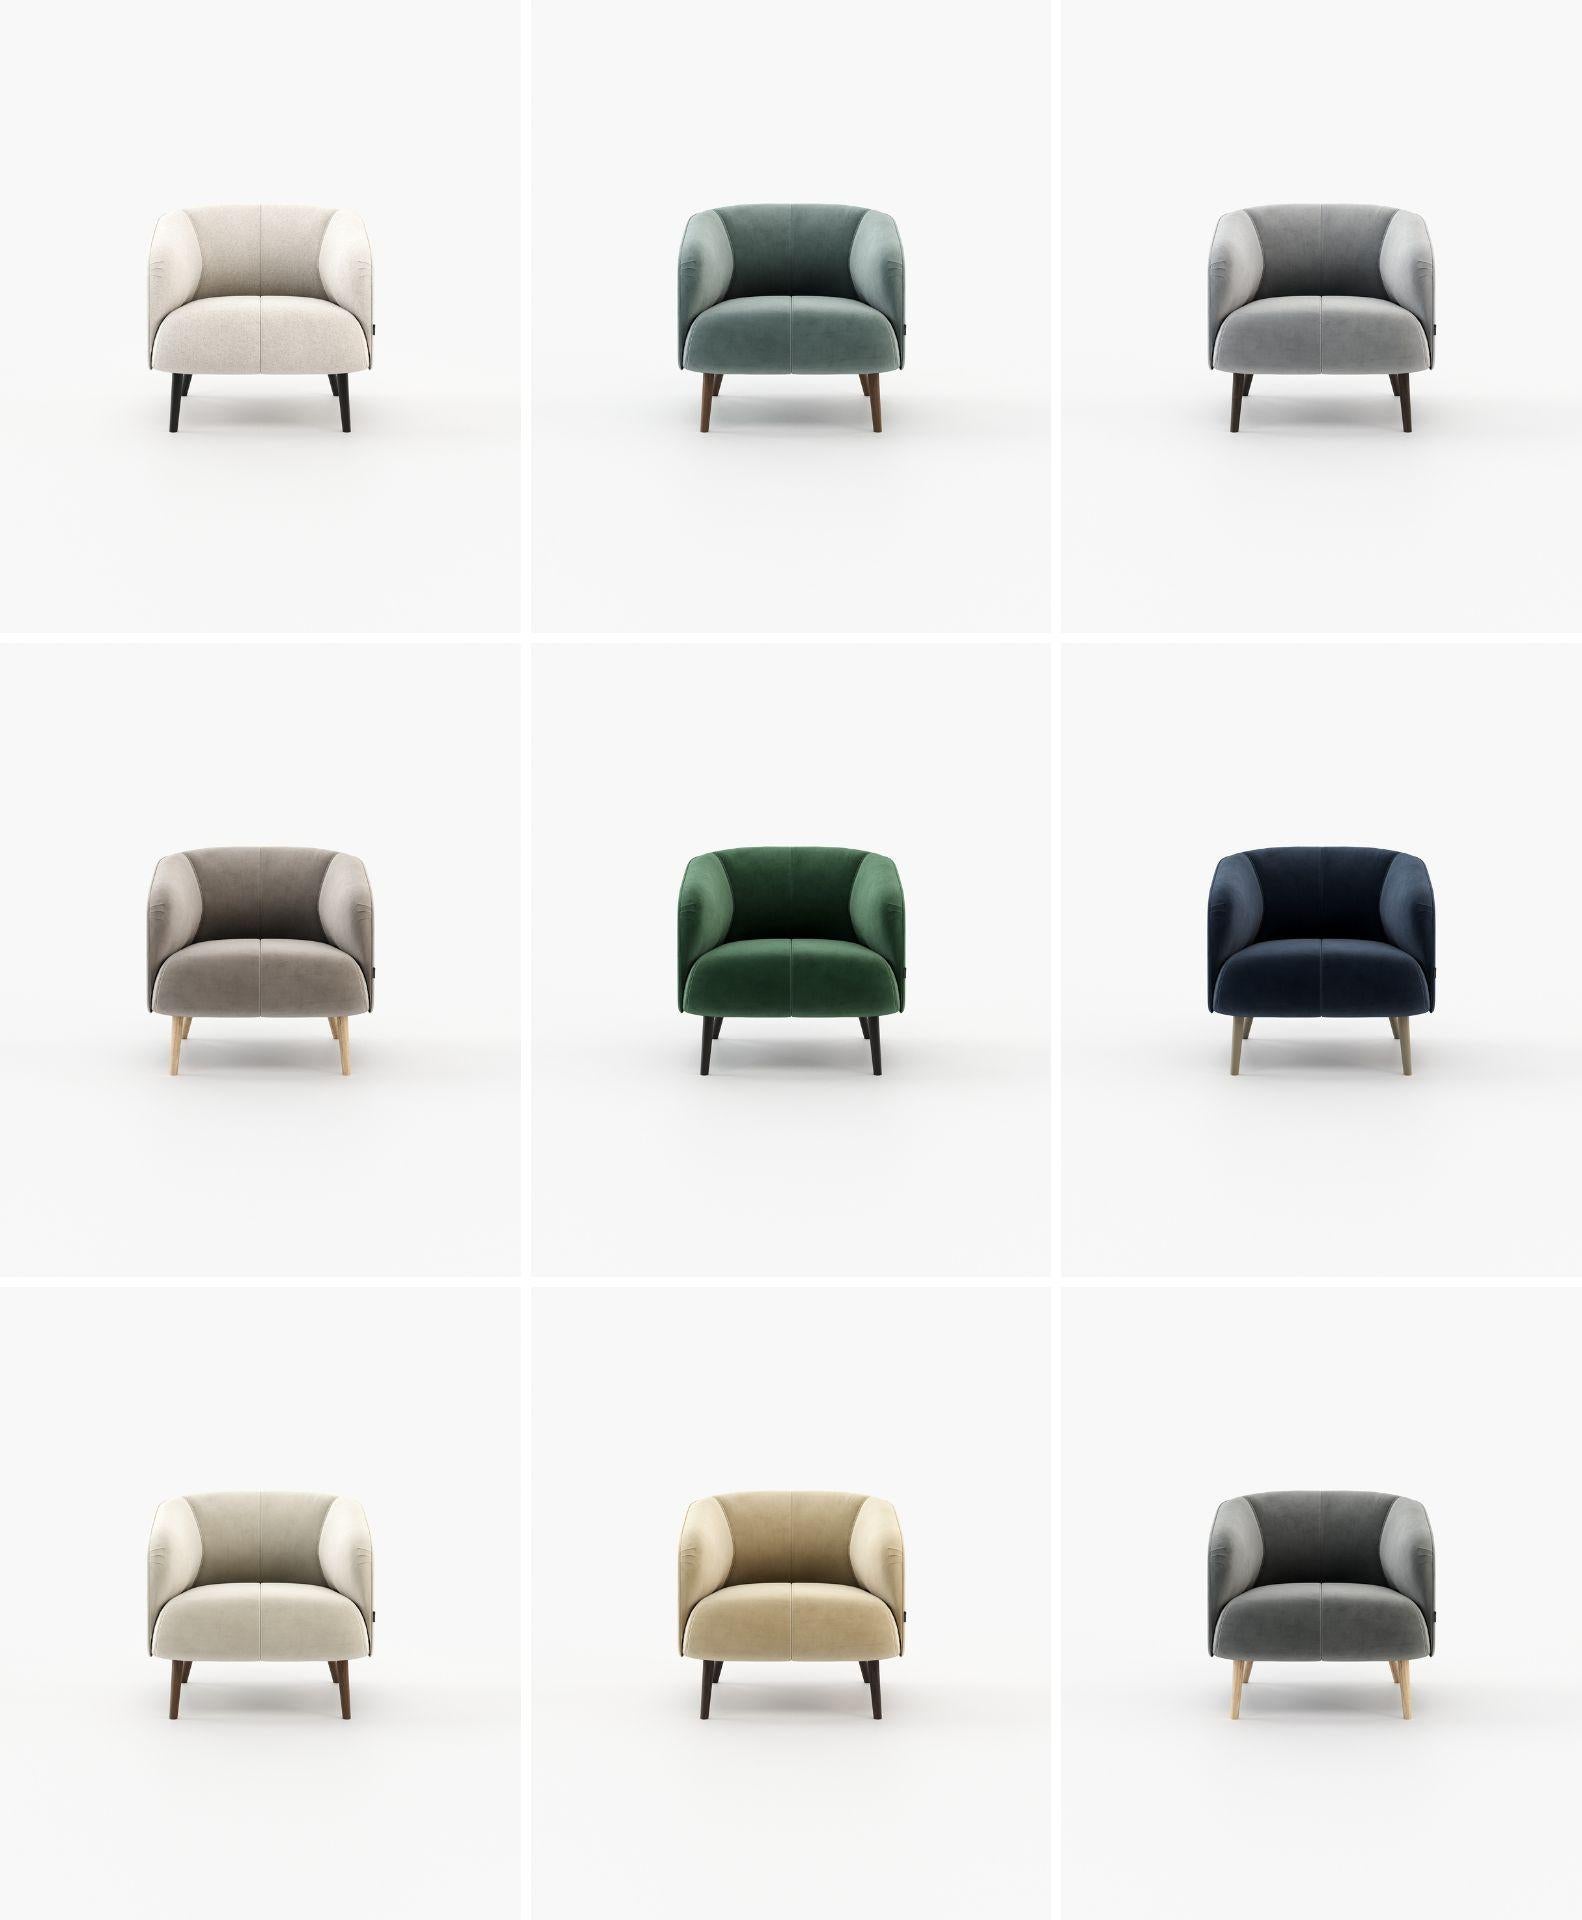 Hand-Crafted Contemporary Upholstered armchair, availabe in multiple fabrics For Sale